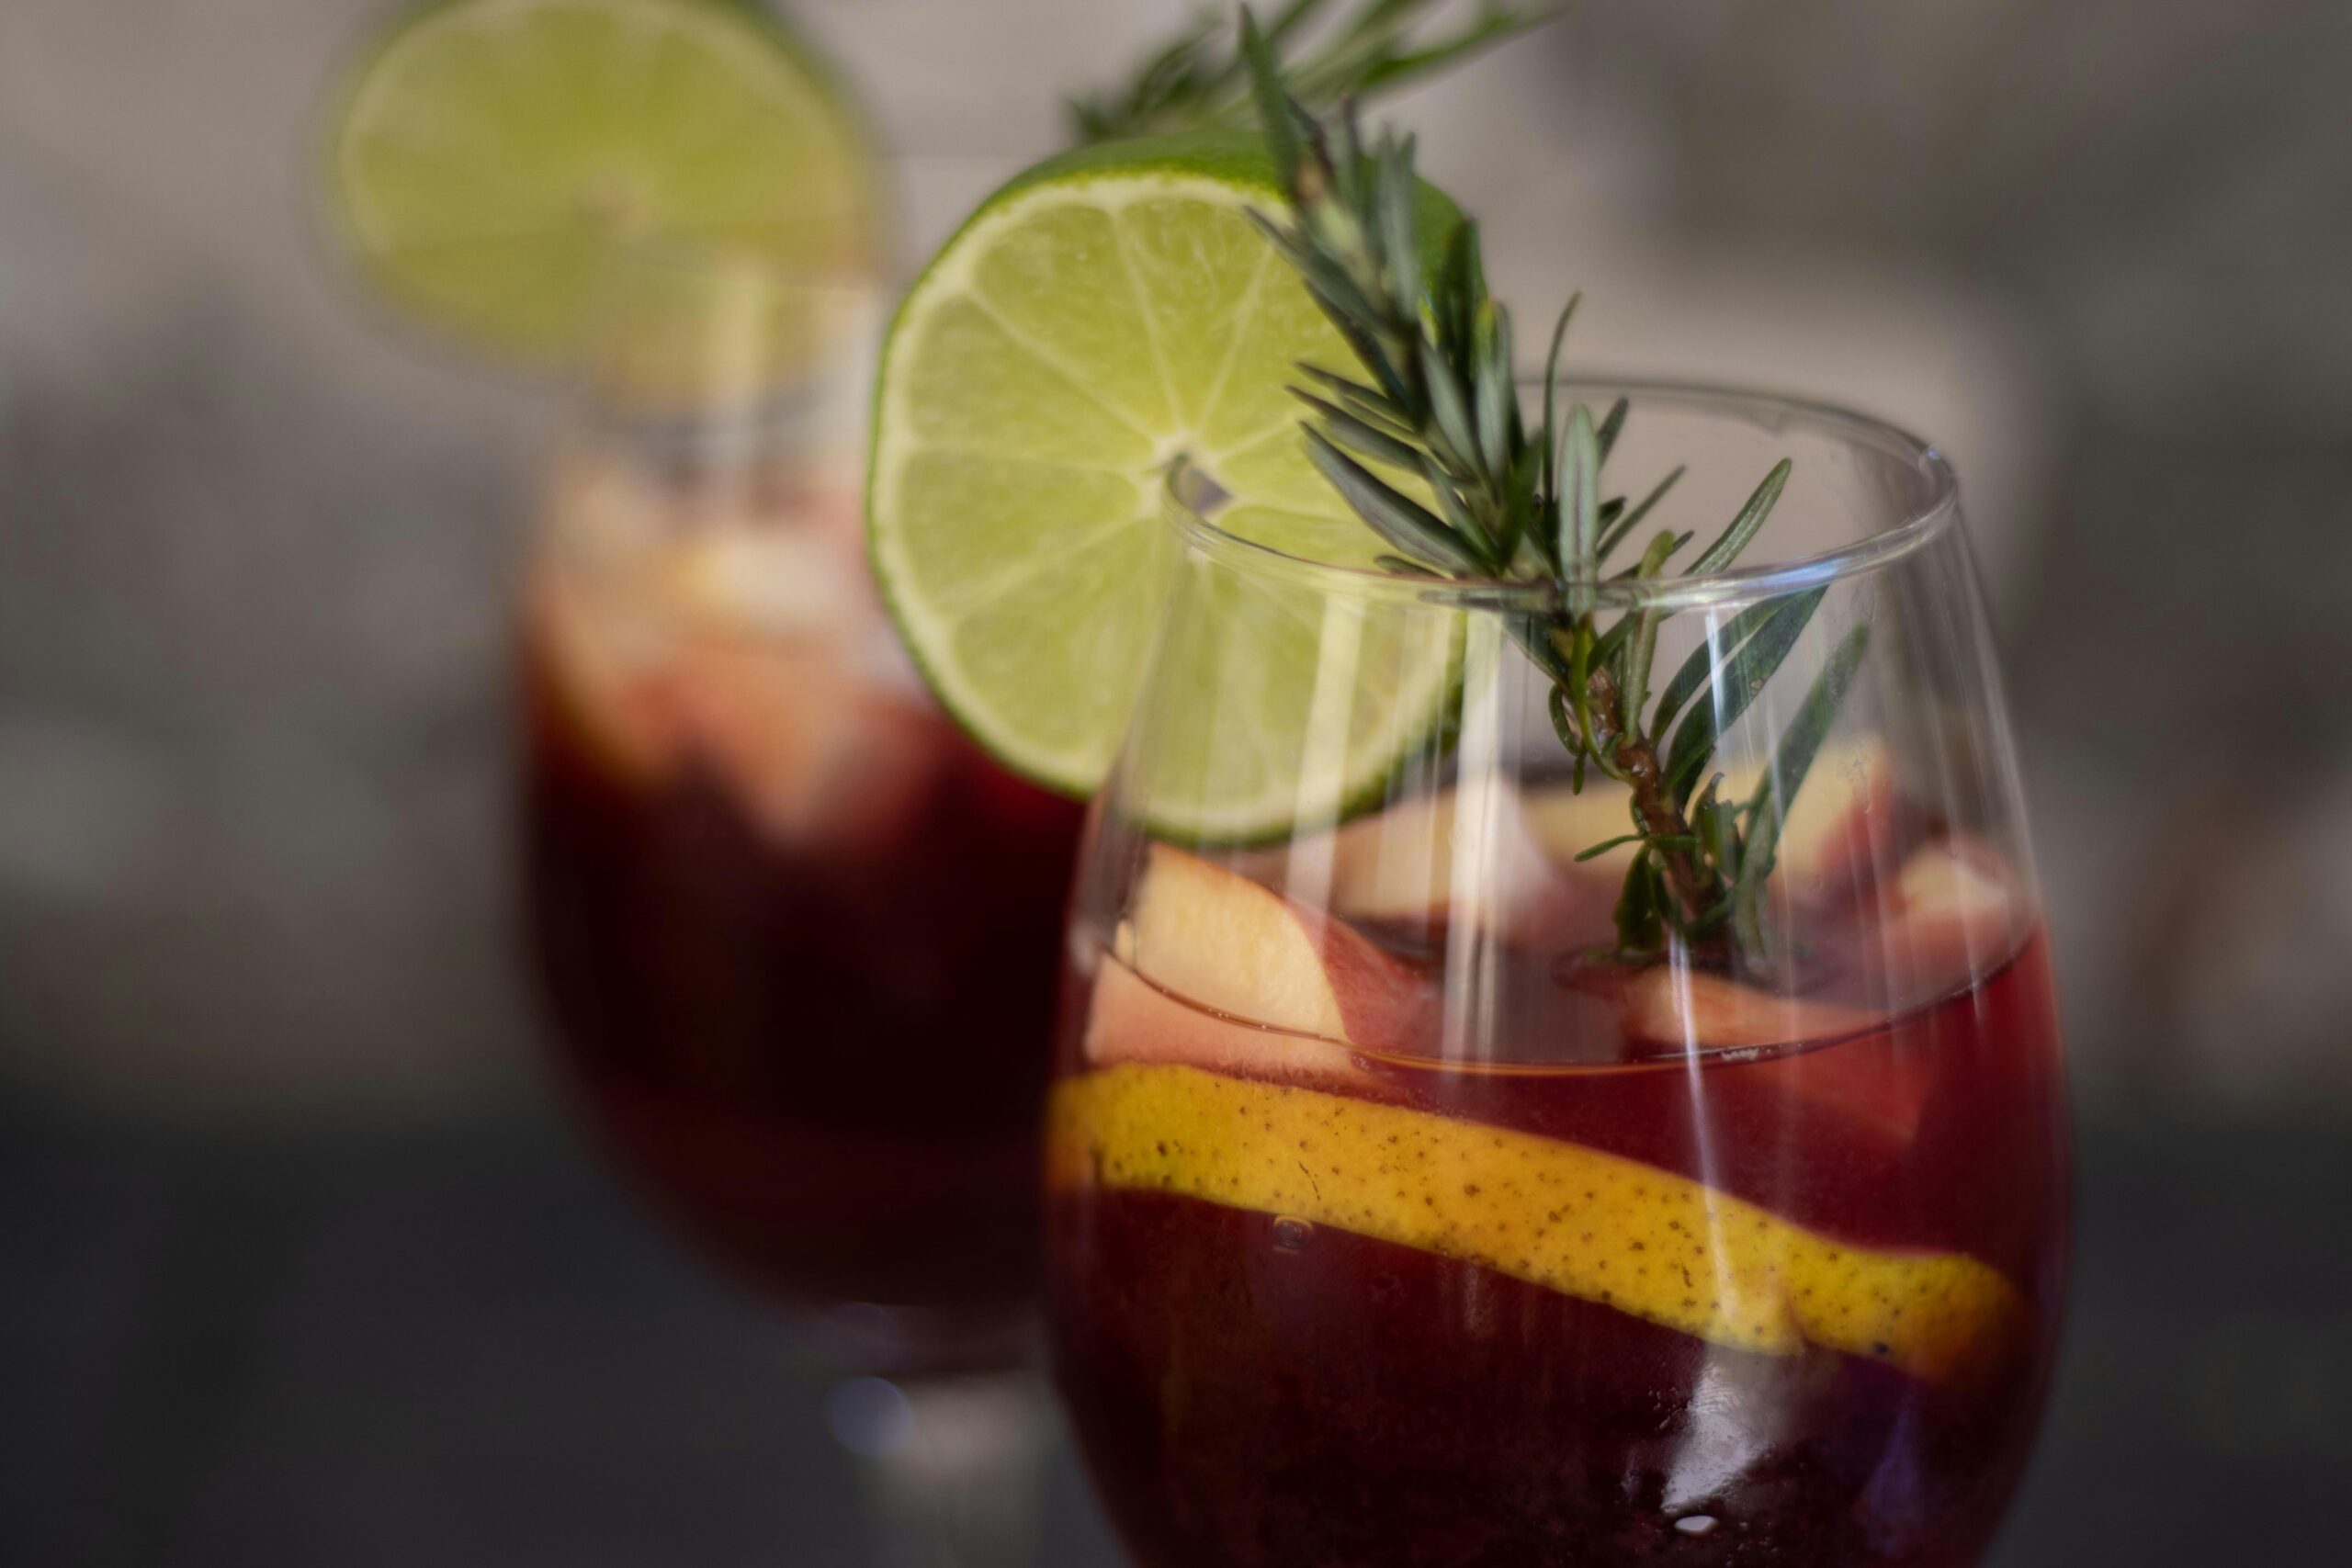 Make a classic sangria cocktail for Valentine's Day. Pictured: Red wine sangria